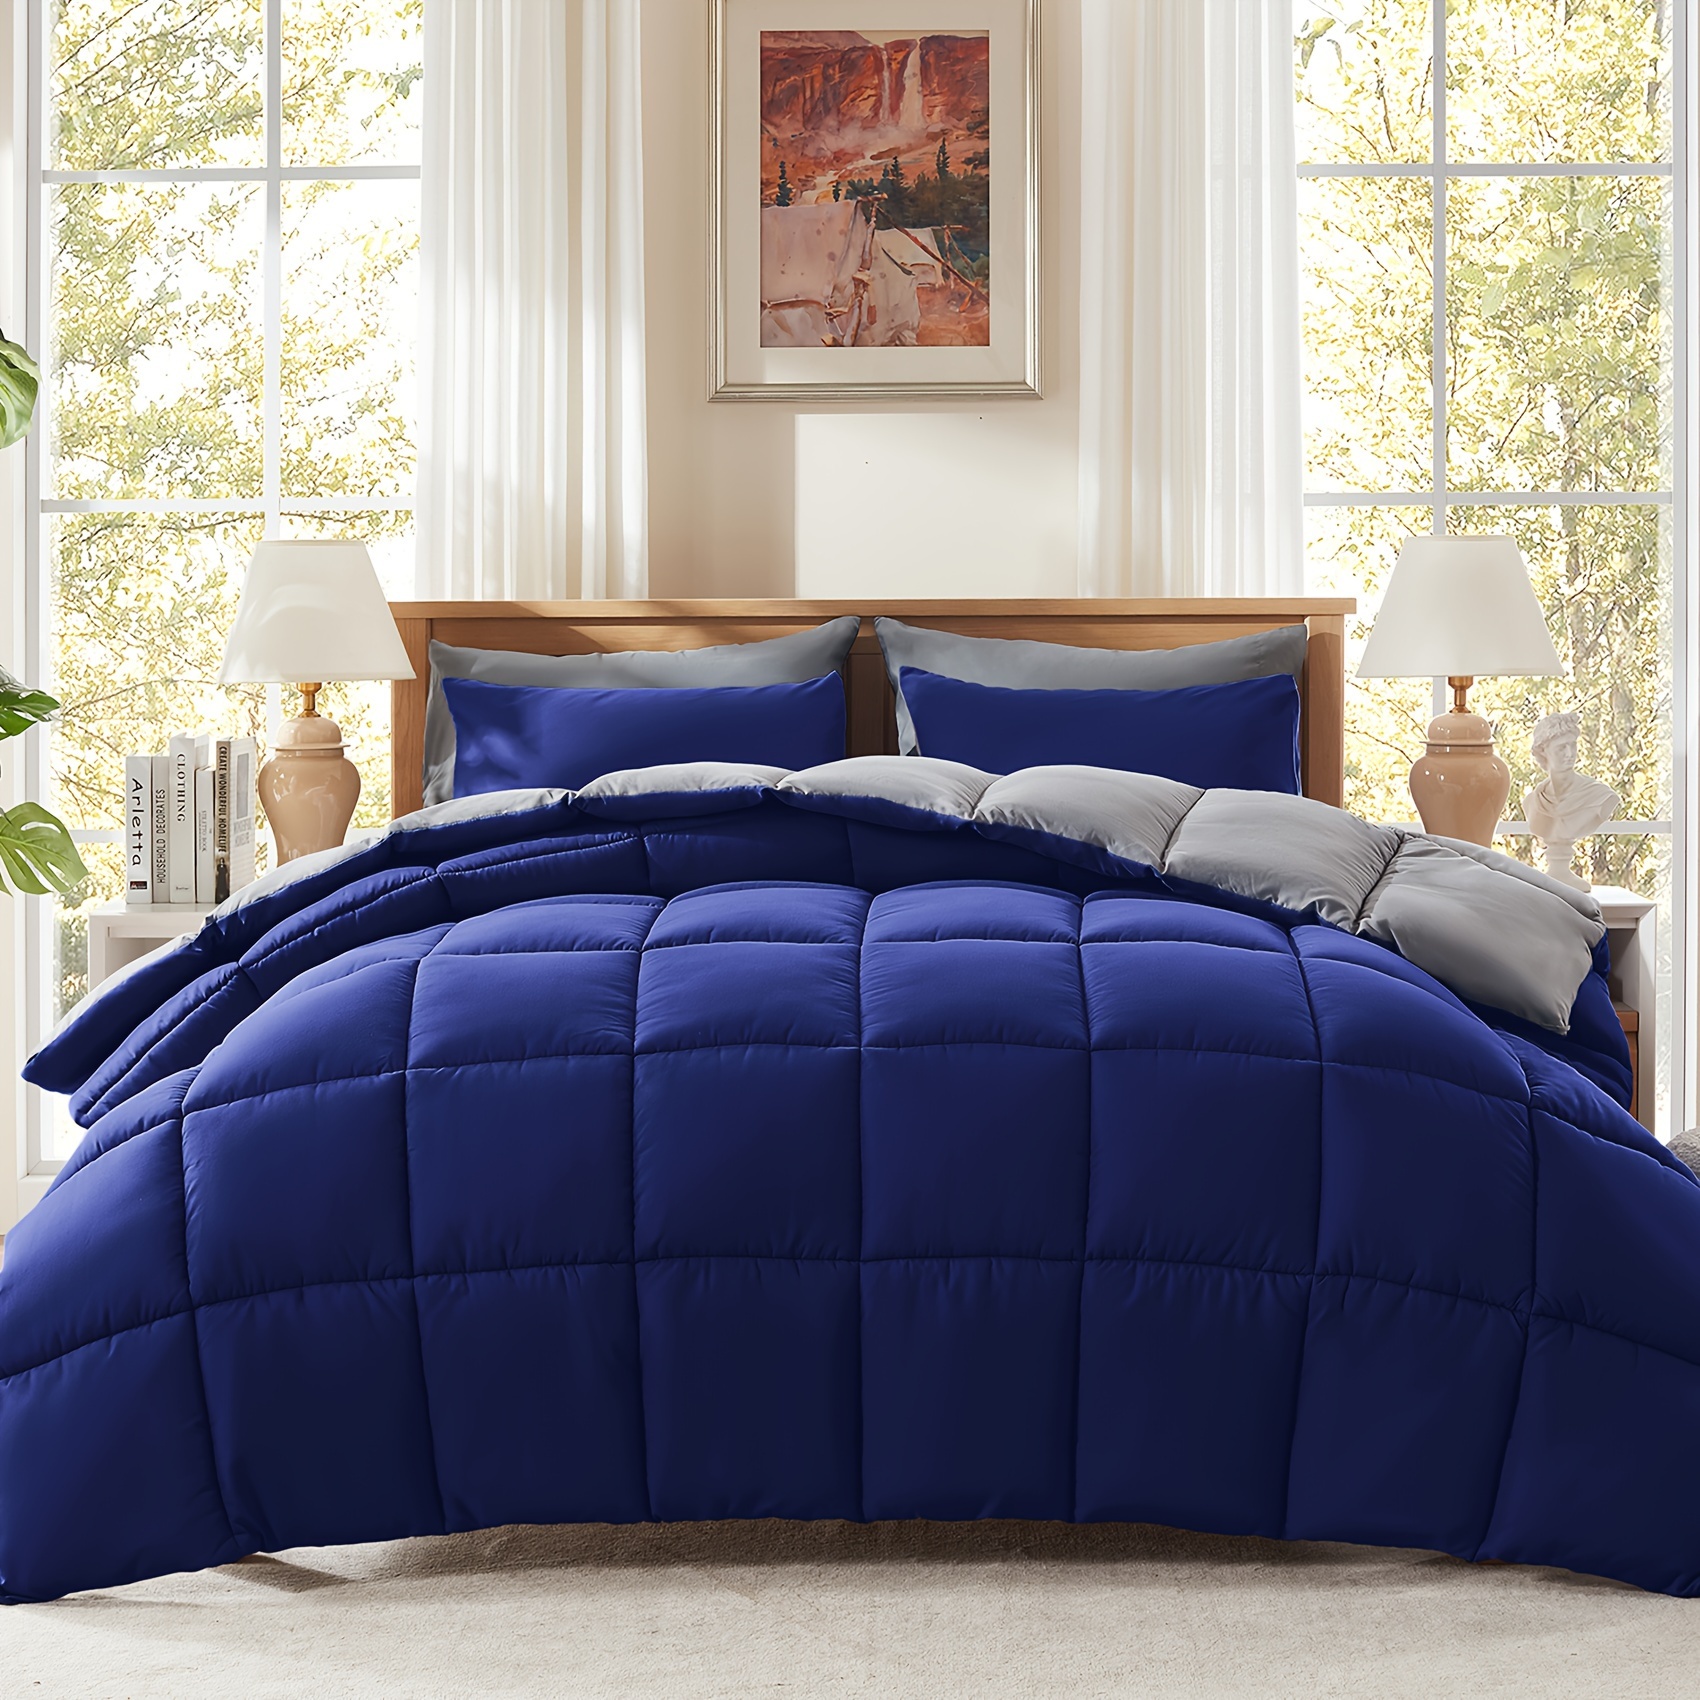 

Cosybay 3pc Blue And Grey Comforter Set - All Season Reversible Down Alternative Comforter With Pillowcase Quilted Duvet Insert With Corner Tabs - Box Stitched - Breathable, Soft, Fluffy